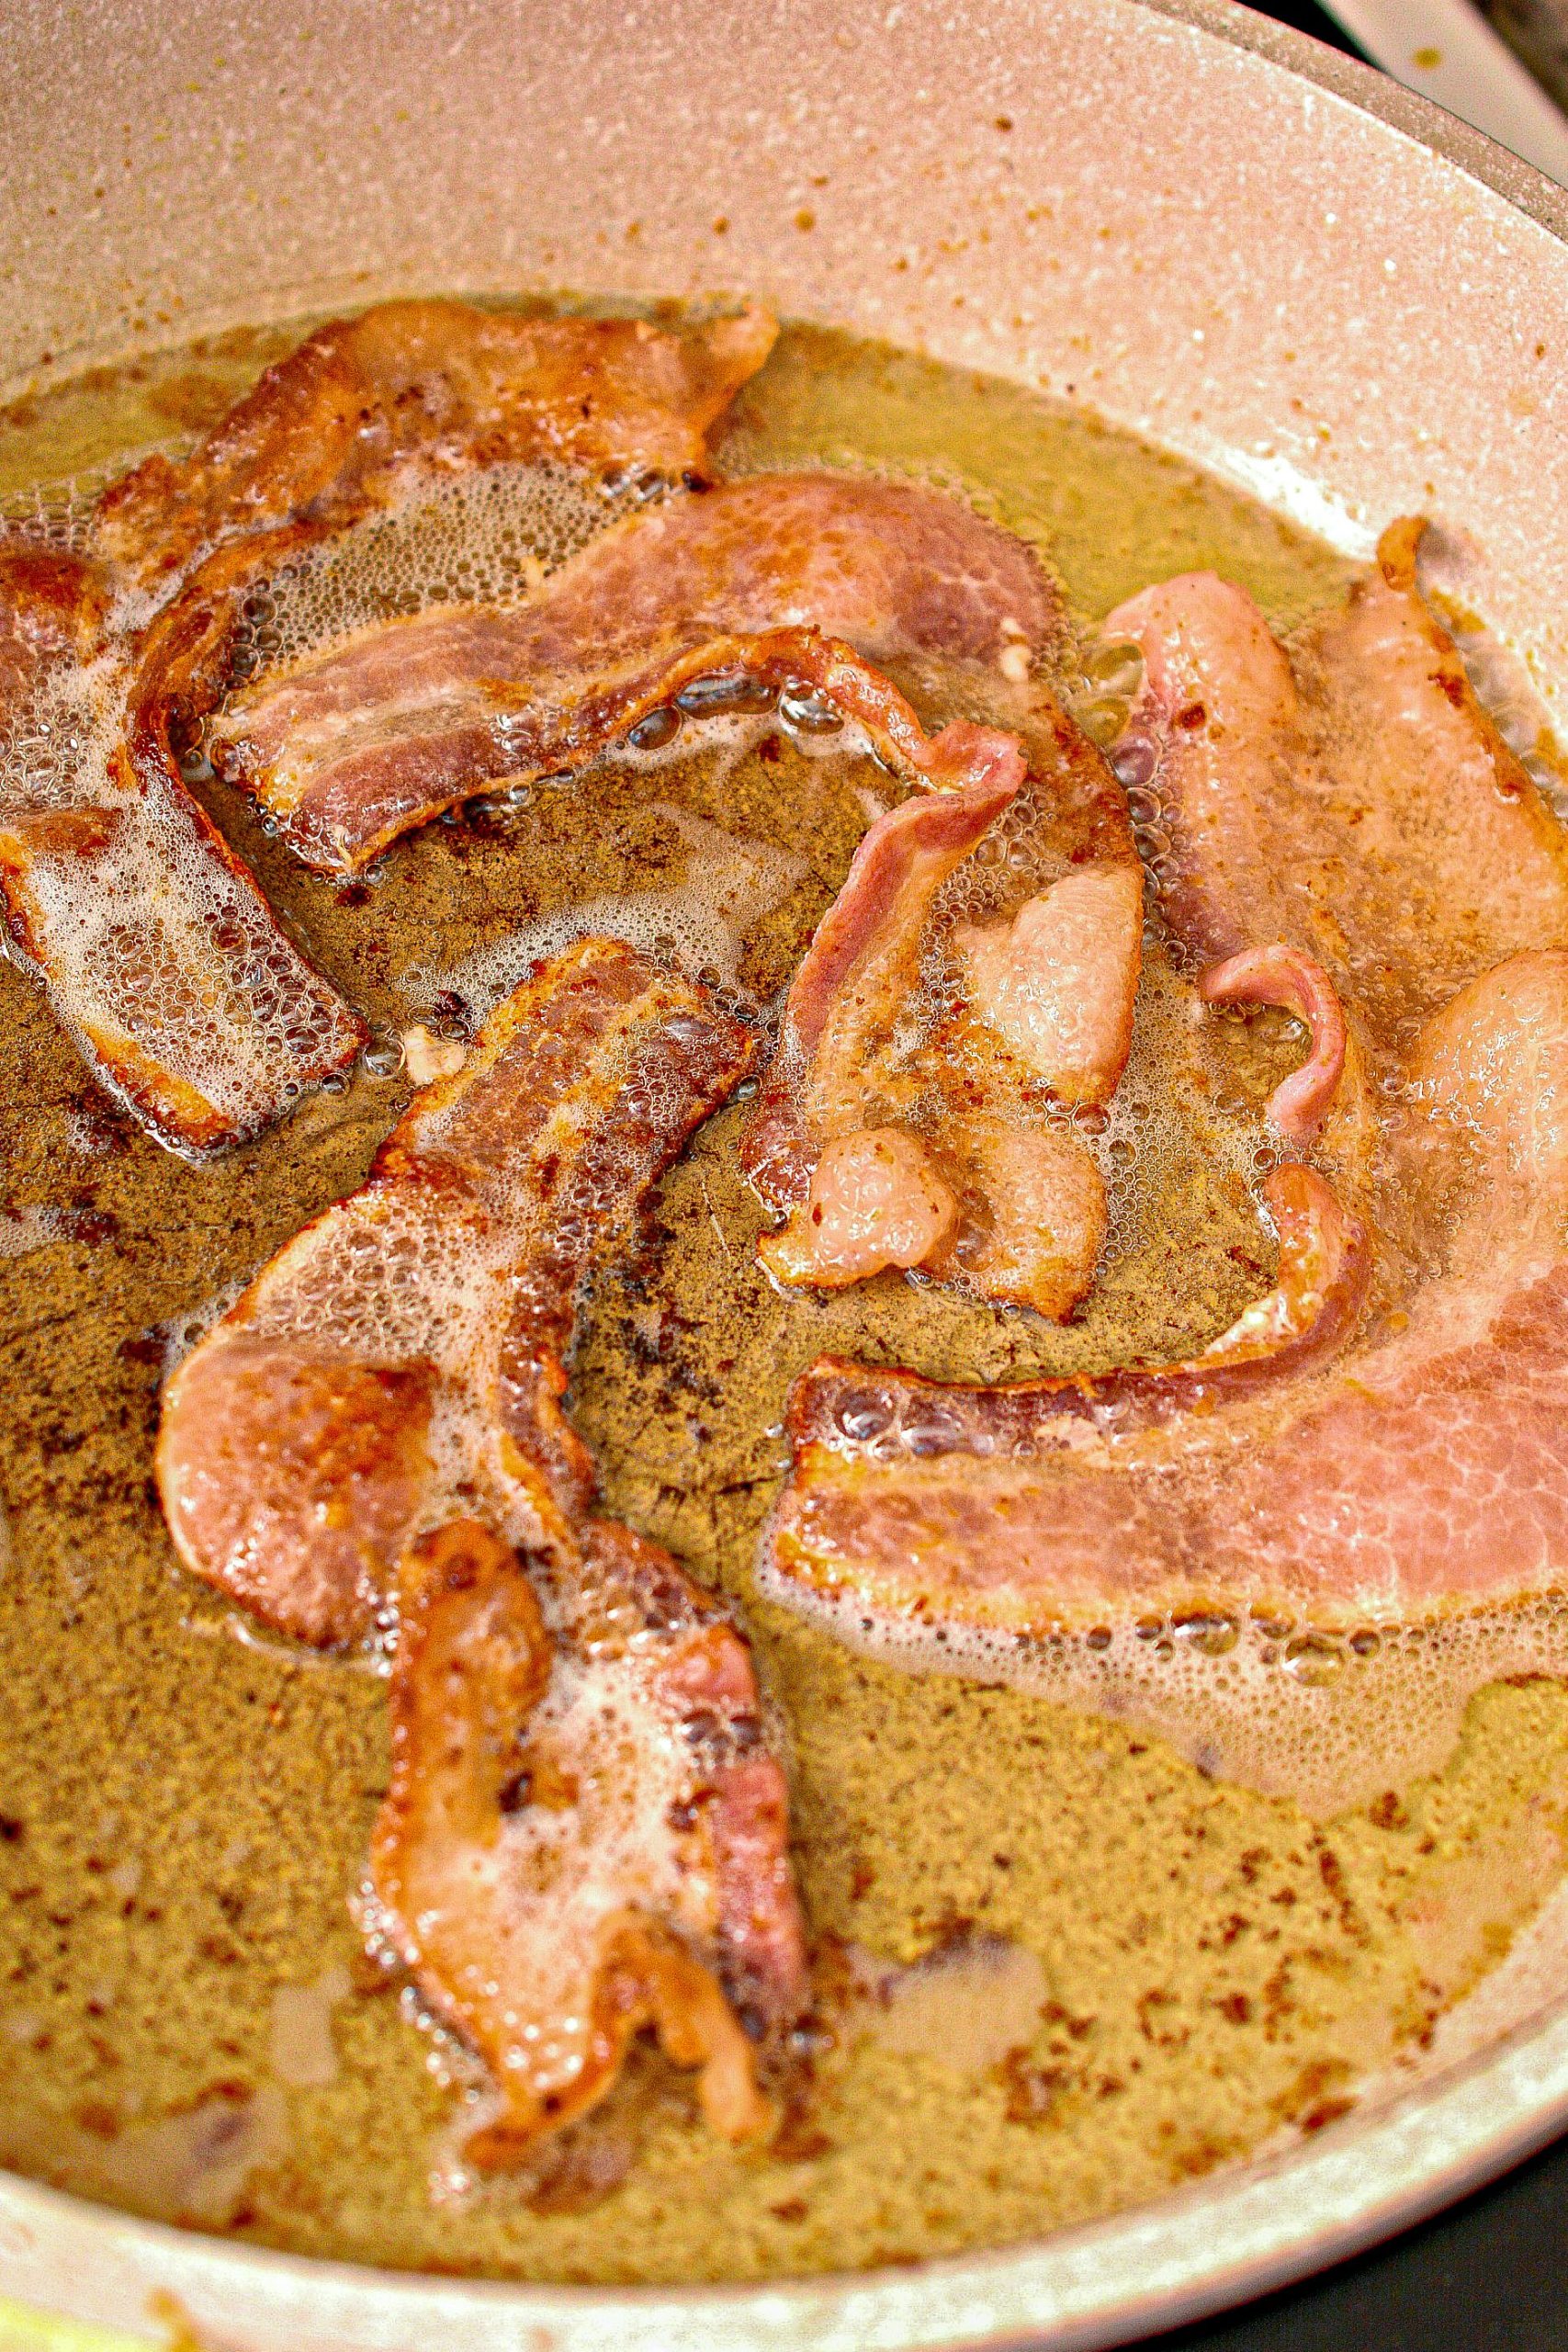 While the chicken is cooking, partially cook the bacon until the fat is all rendered from it, but it is not crispy yet.